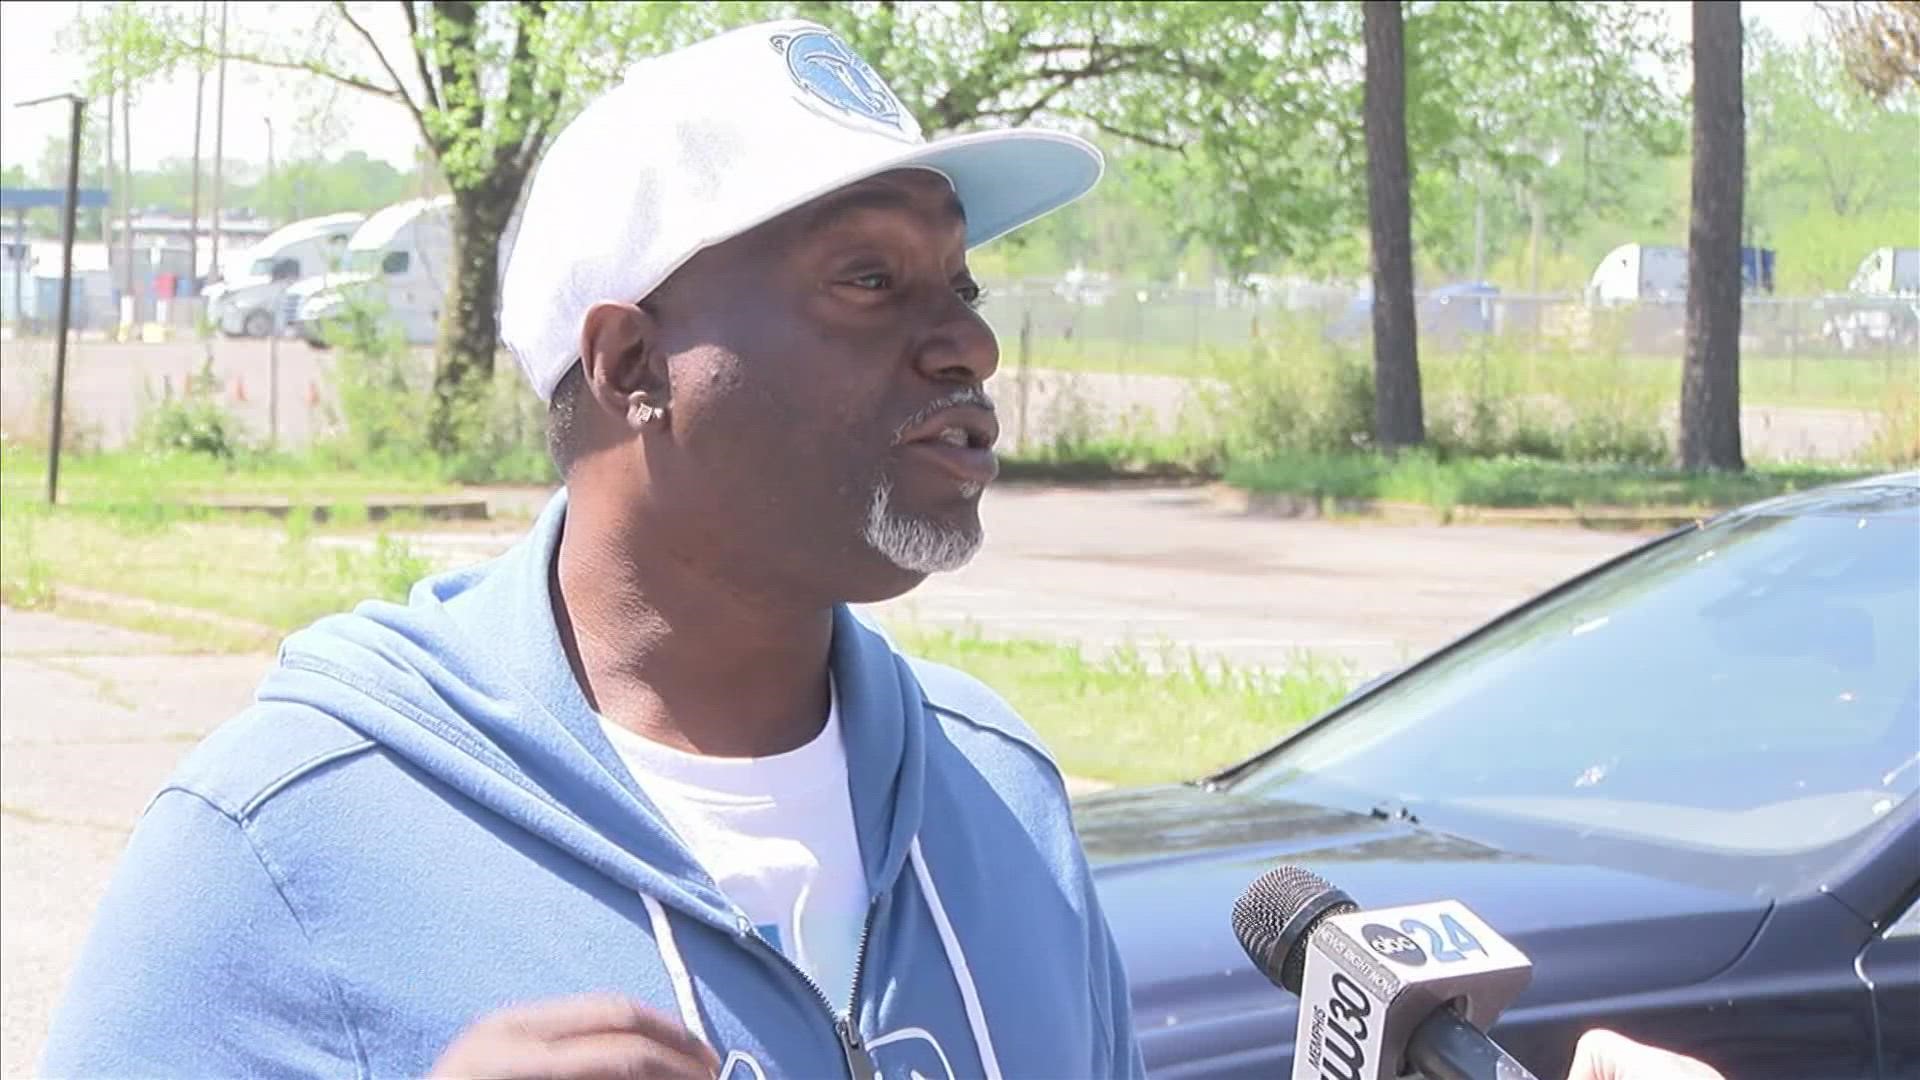 Starting May 1, '901 Bloc Squad' is doubling mentors - including former gang members - to inspire a different path in Memphis' most crime challenged communities.